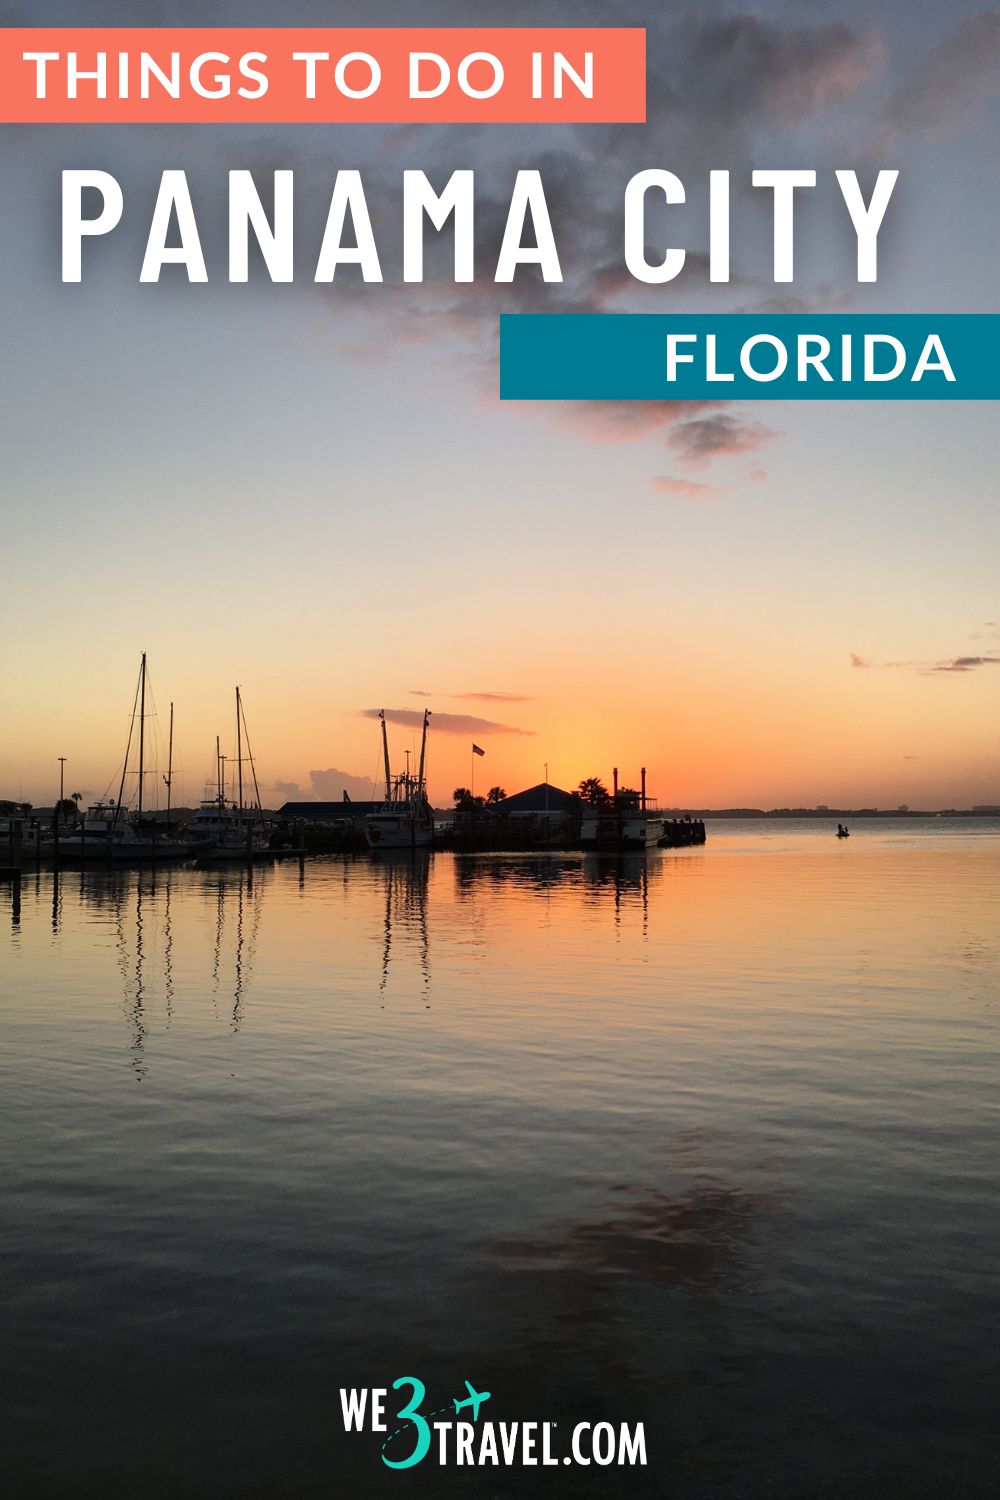 Discover the small town charm of St. Andrews and the fun things to do in Panama City Florida, just hop across the bay from popular Panama City Beach on Florida's Northwest Gulf Coast.